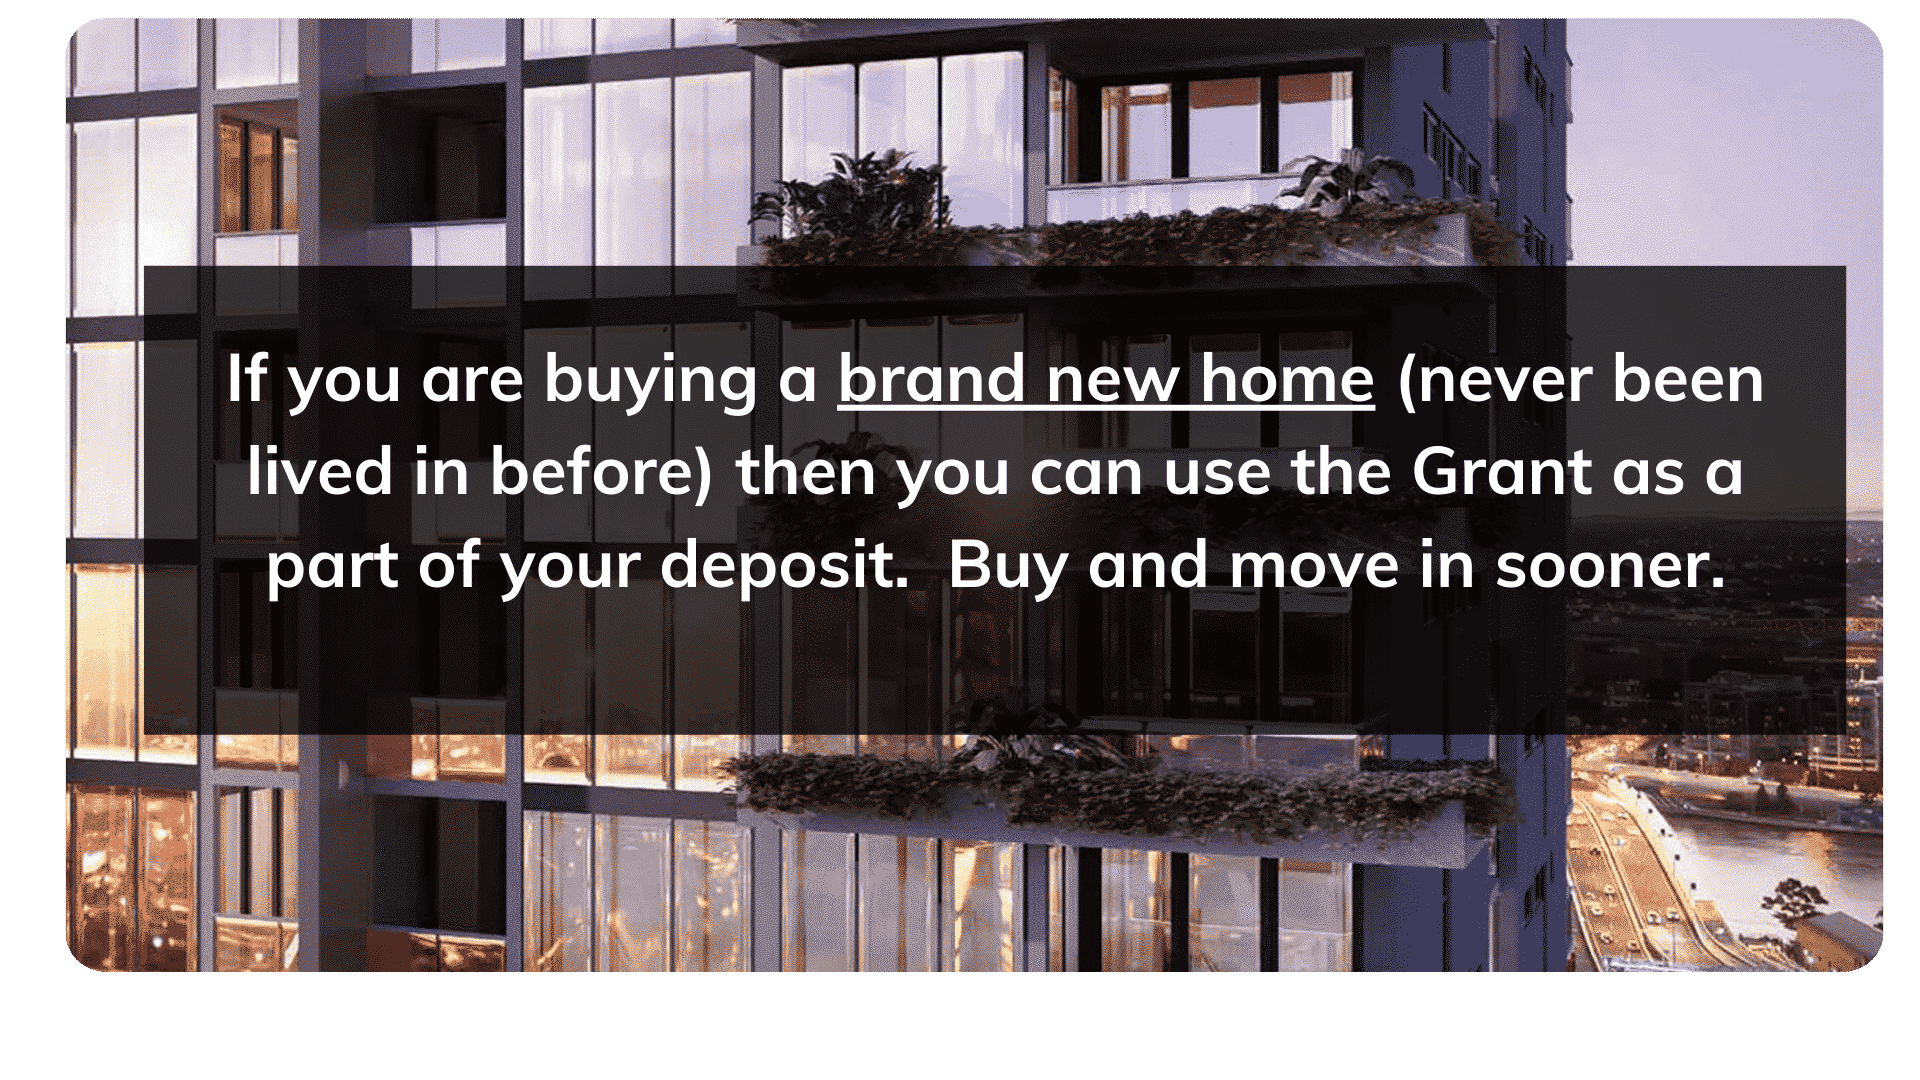 If you are buying a brand new home then you can use the grant as a part of your deposit.